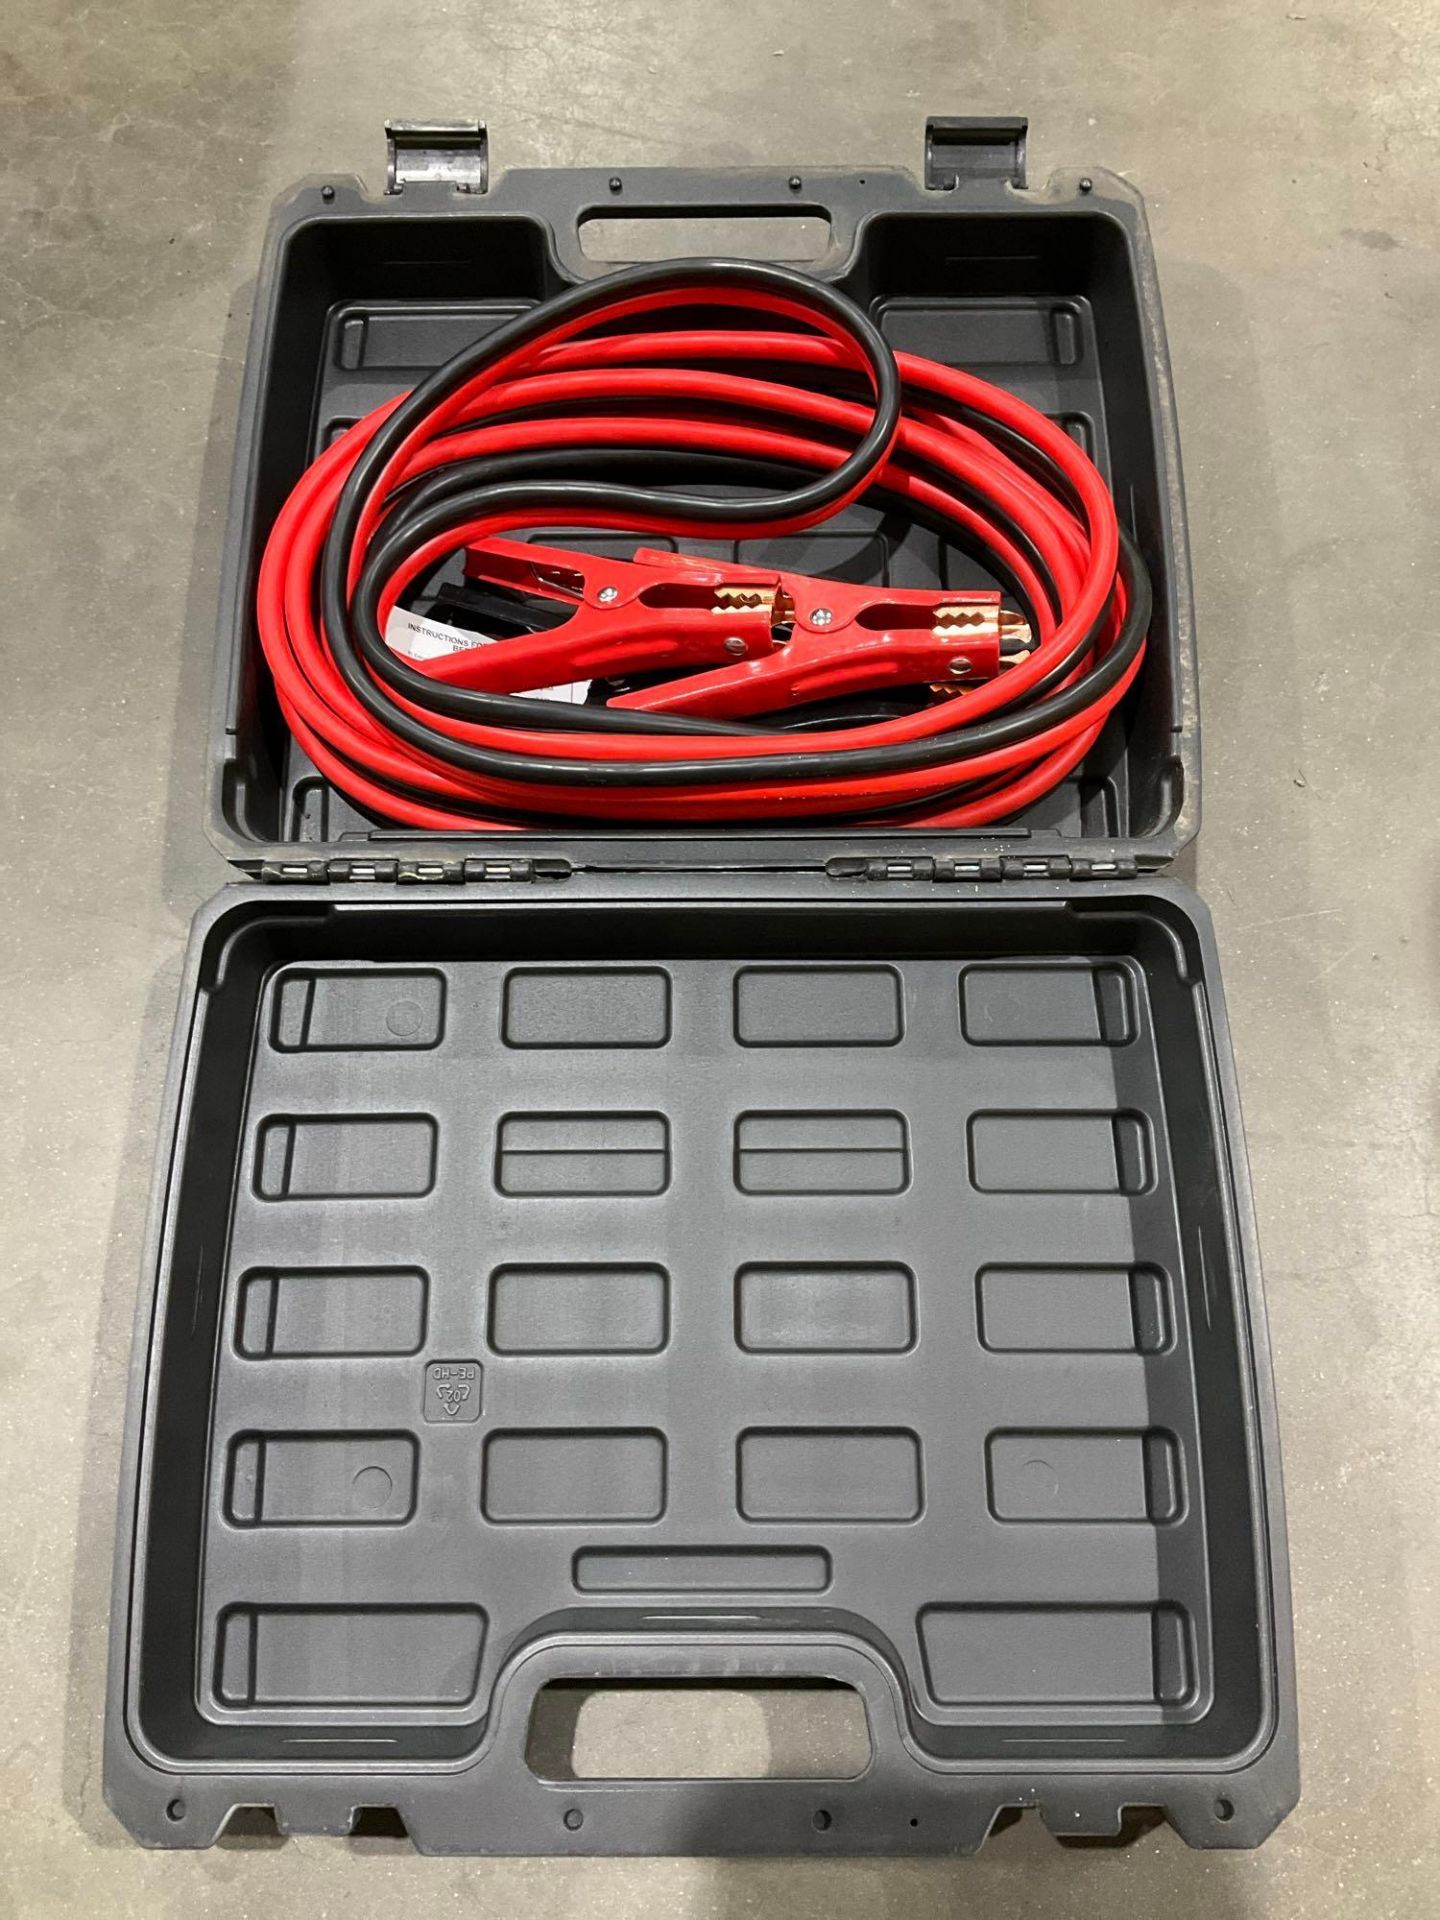 UNUSED PRO-START 20FT BOOSTER CABLES IN CARRYING CASE, 4 GAUGE - Image 2 of 4